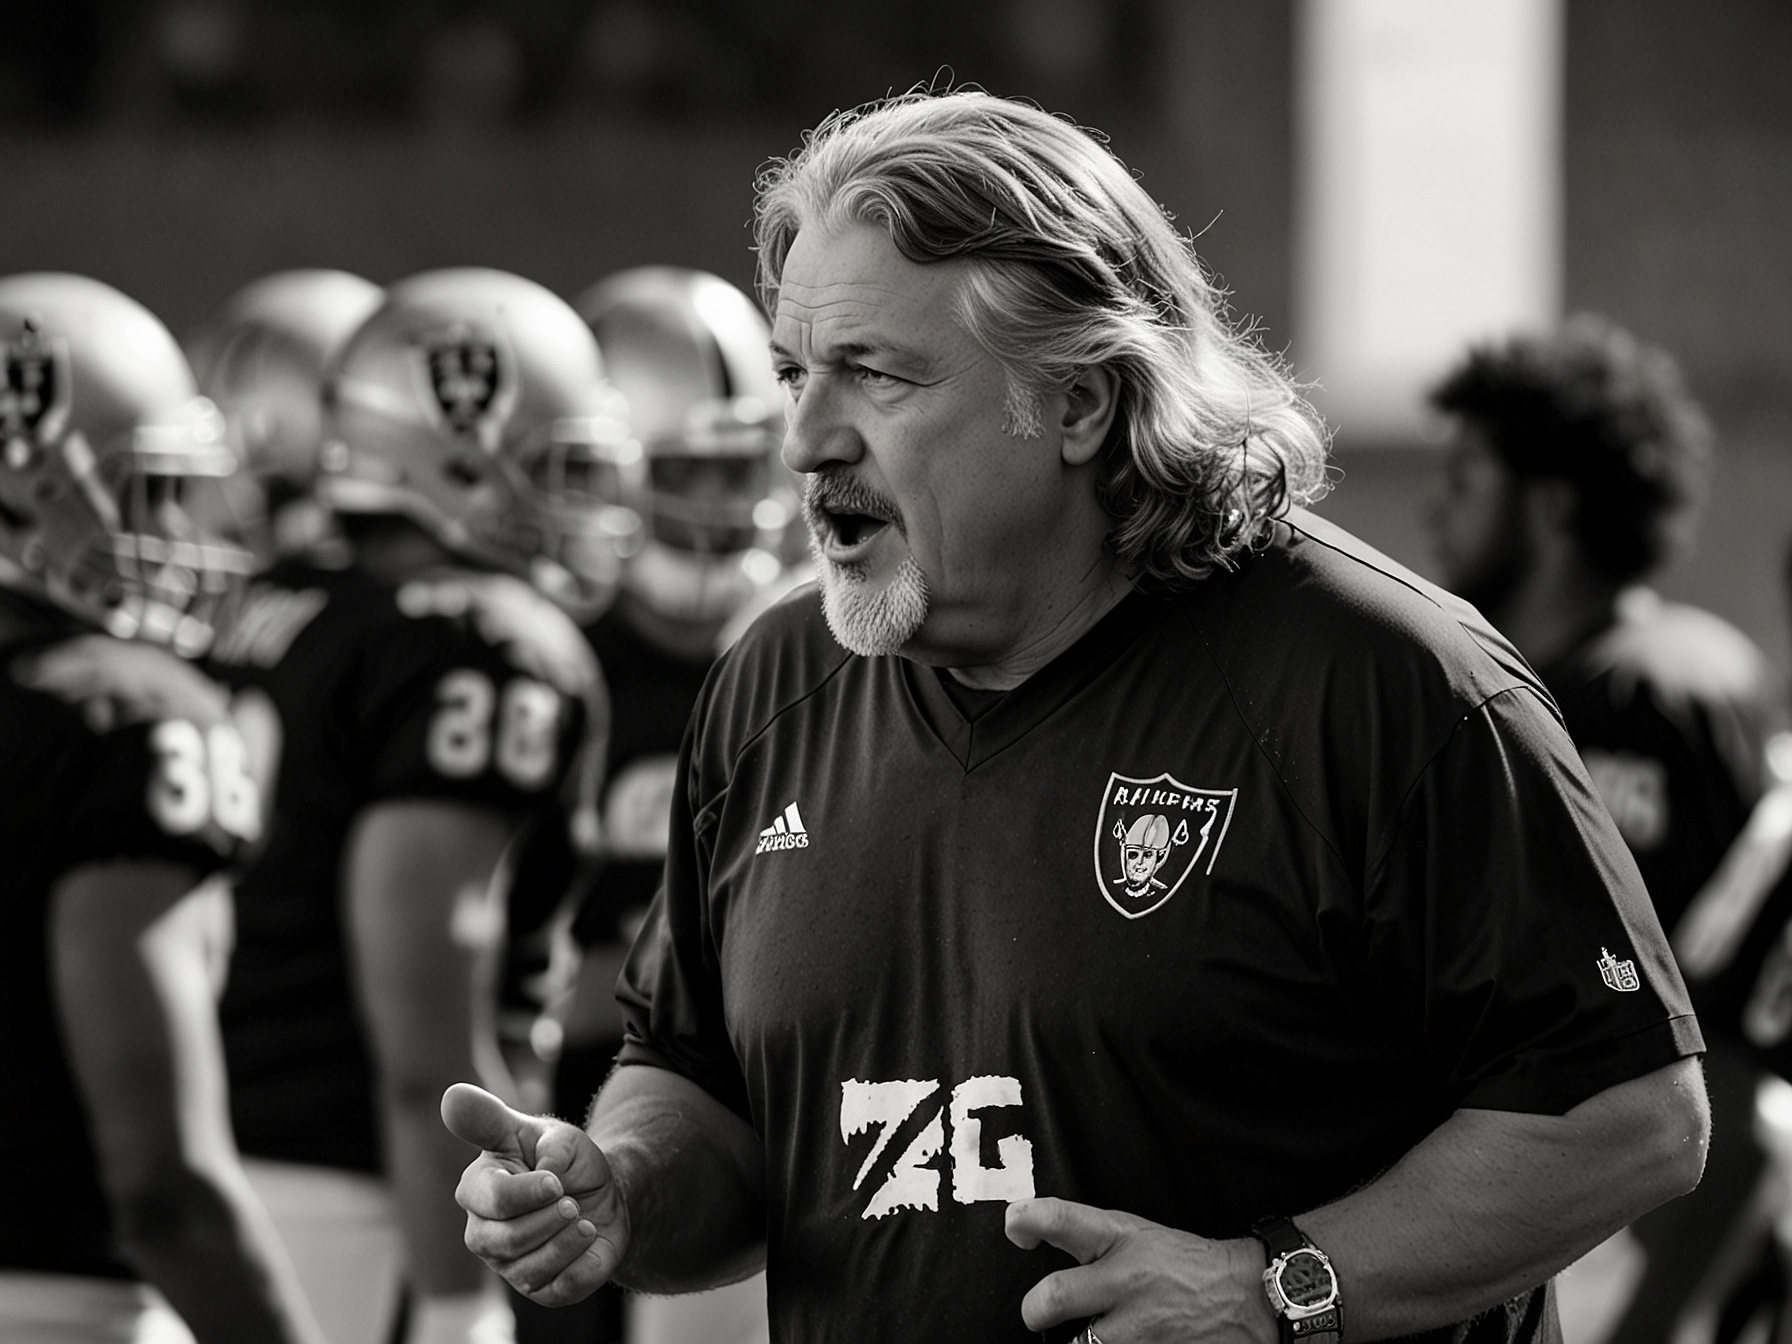 Rob Ryan passionately discussing strategy with the Raiders' 4th-year safety during a practice session, emphasizing his role as a mentor and recognizing the player's talent and potential.